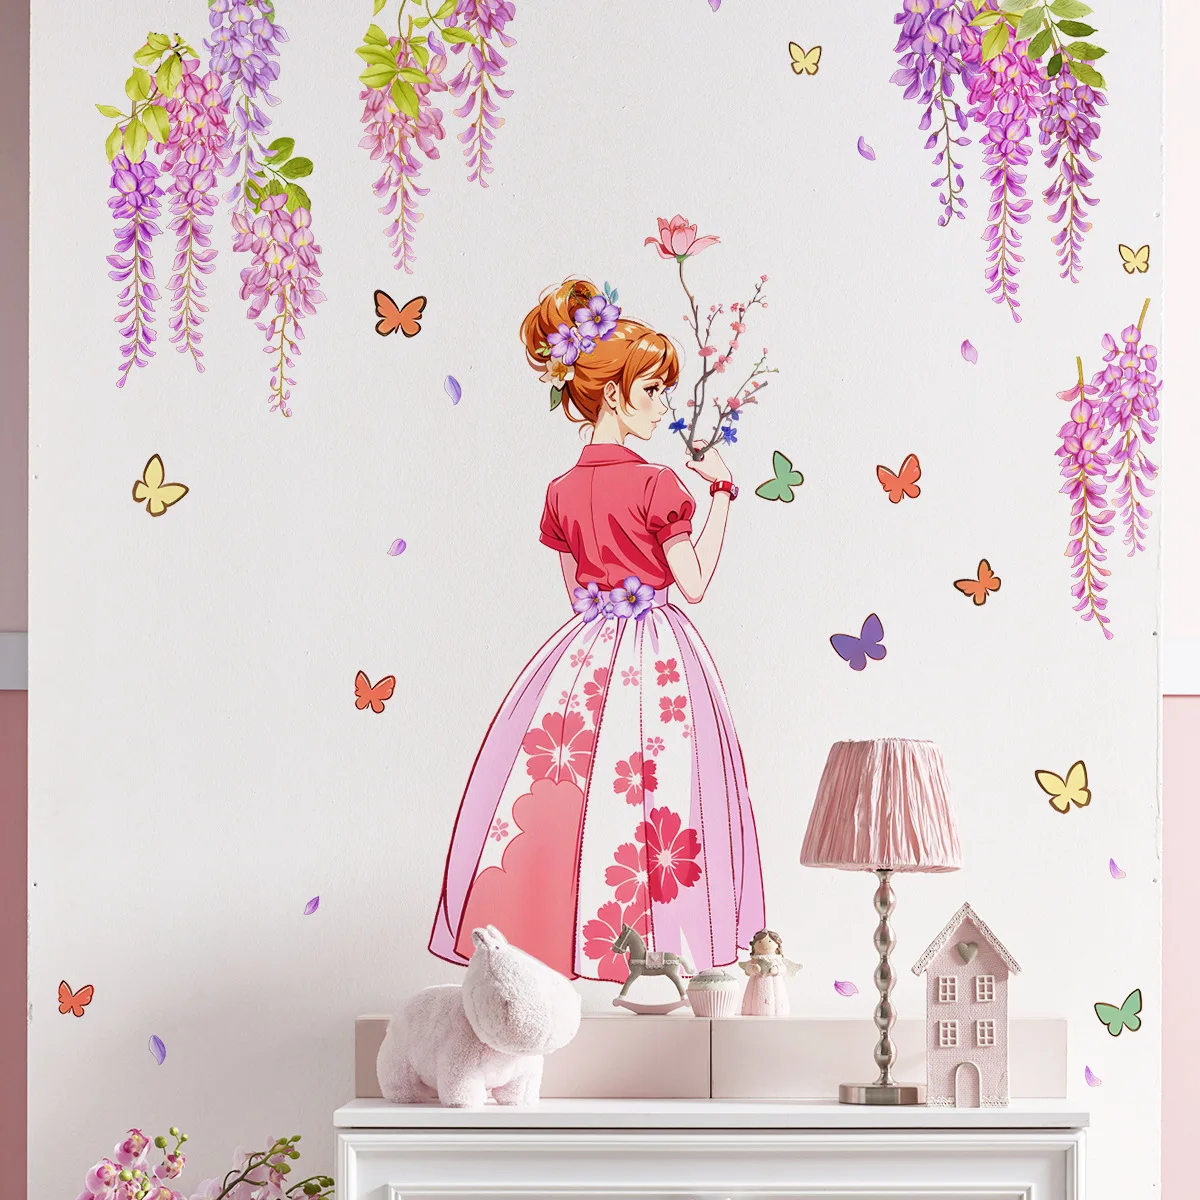 2pcs Plant Vine Girl Butterfly Wall Stickers Living Room Bedroom Background Wall Home Decorative Wall Stickers Wallpaper Ms3032 beibehang 53x300cm self adhesive stereo boy girl bedroom wallpaper blue sky blank cloud ceiling sticker wallpaper for kids room